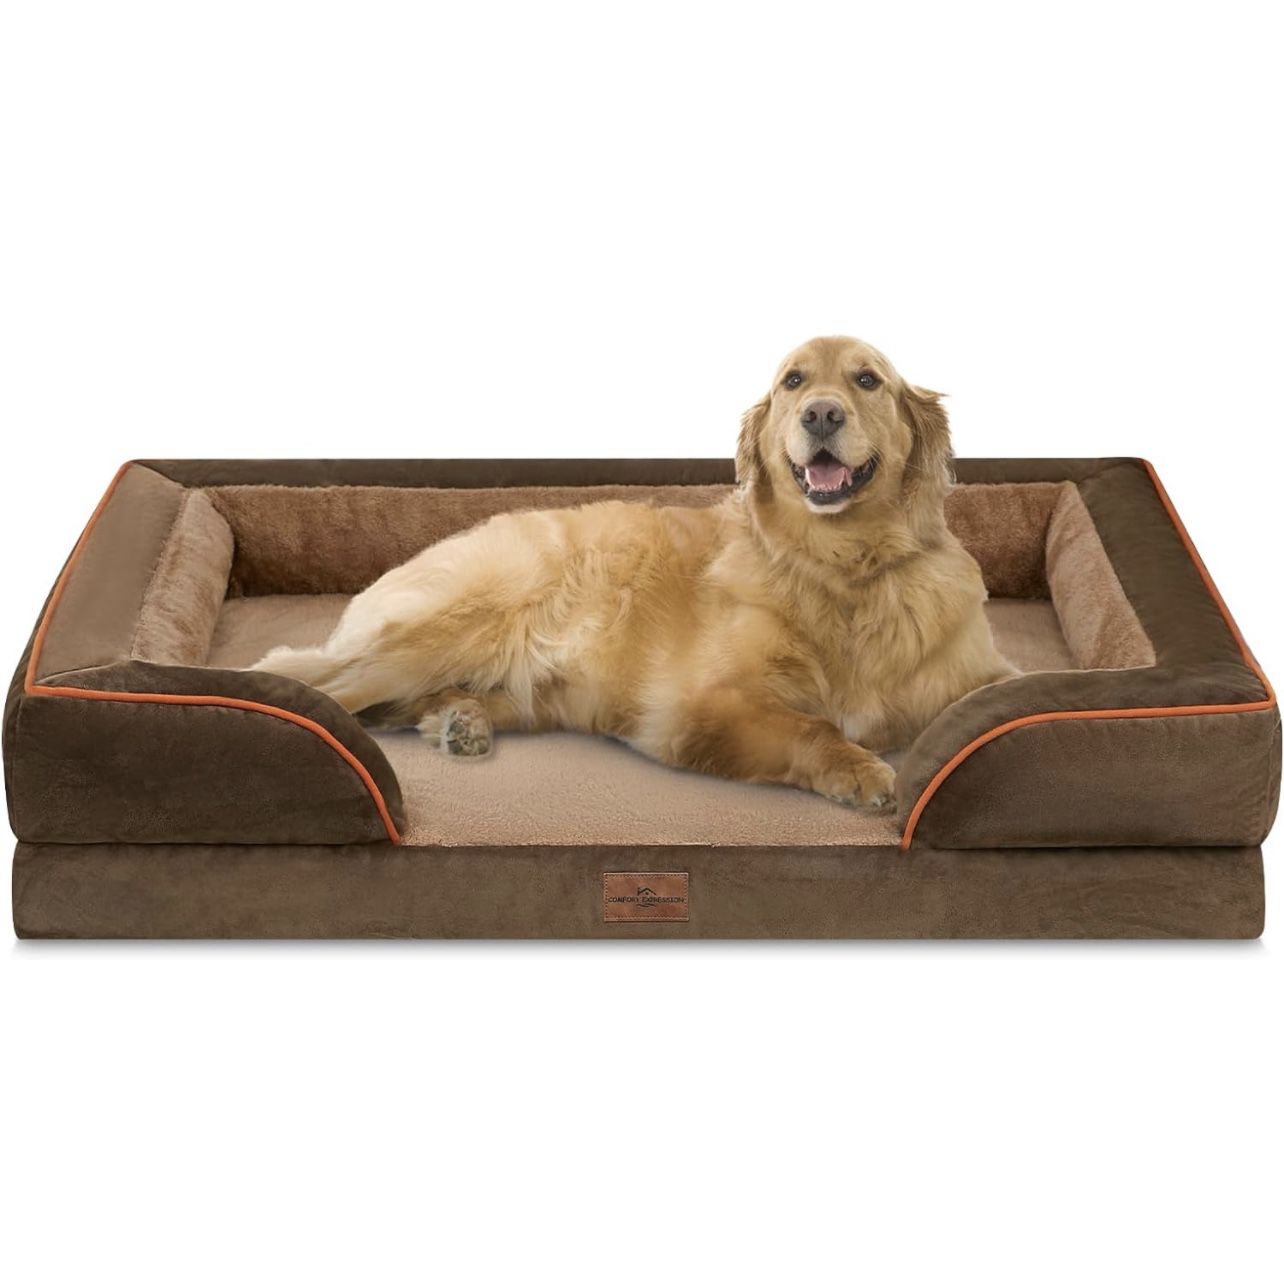 Dog Beds for Extra Large Dogs, Waterproof Orthopedic Foam XL Dog Bed with Bolster